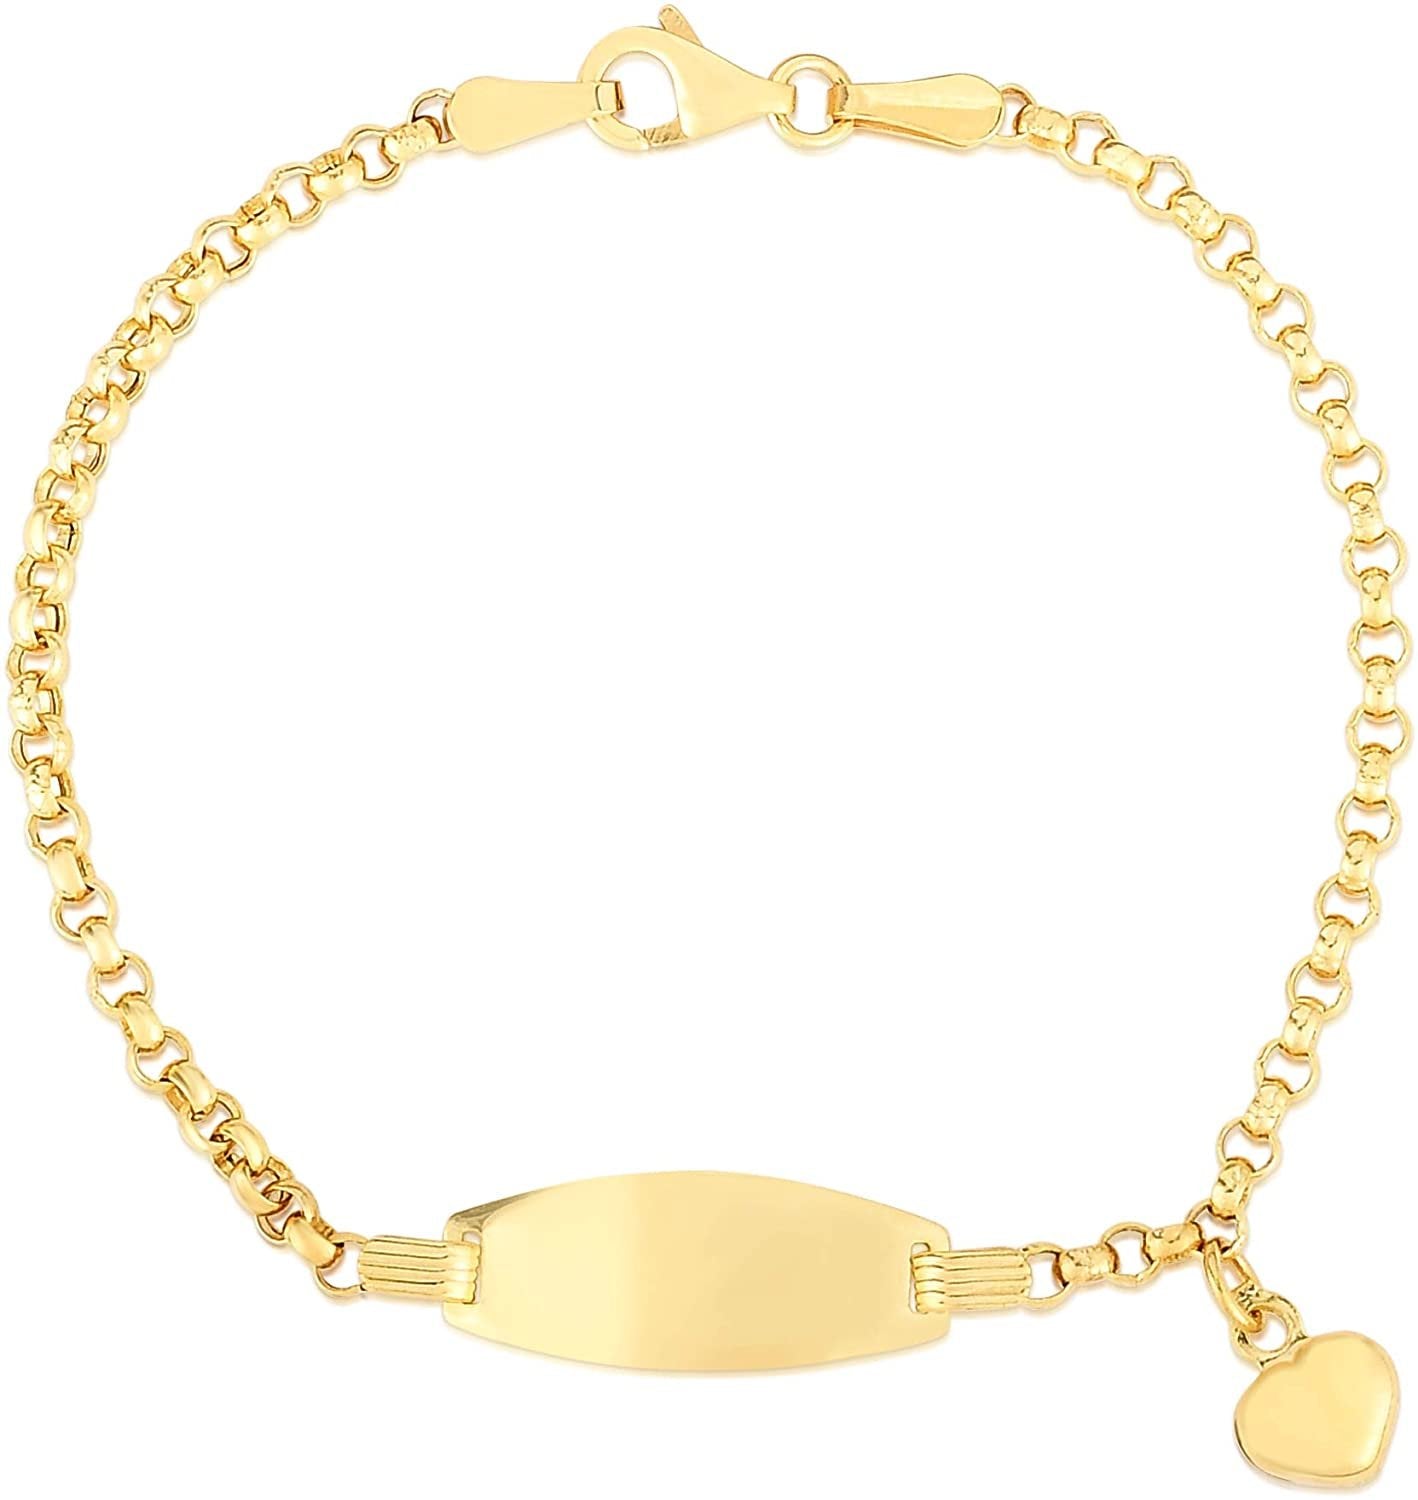 Floreo 14k Yellow Gold Customized ID Rolo and Heart Charm Personalized Name Bracelet for Children 6”